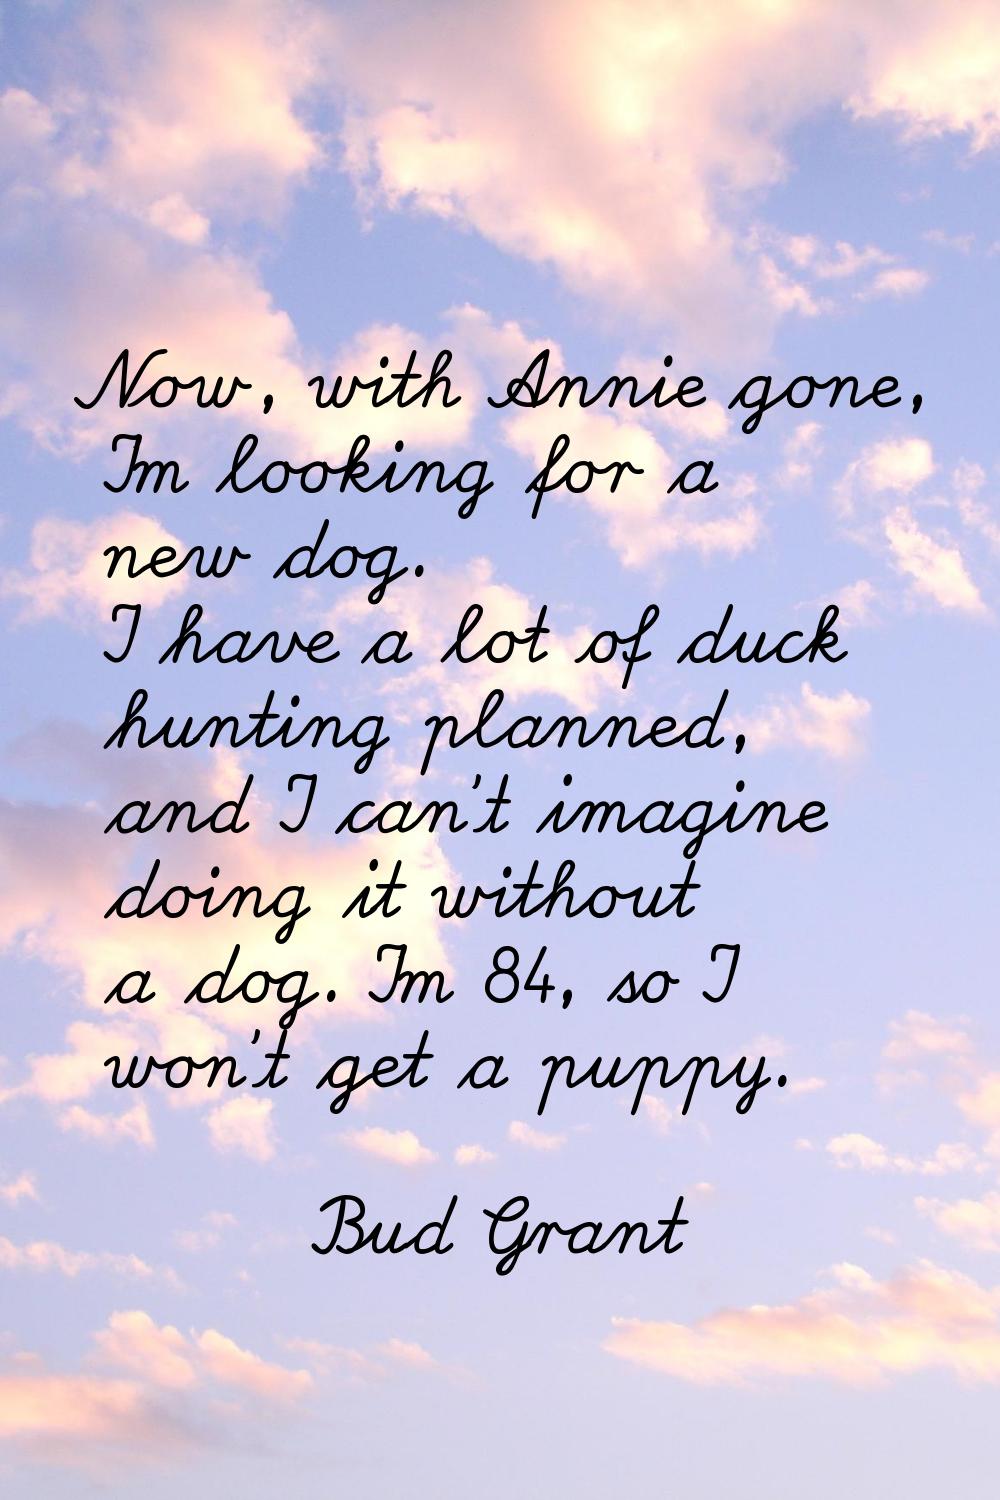 Now, with Annie gone, I'm looking for a new dog. I have a lot of duck hunting planned, and I can't 